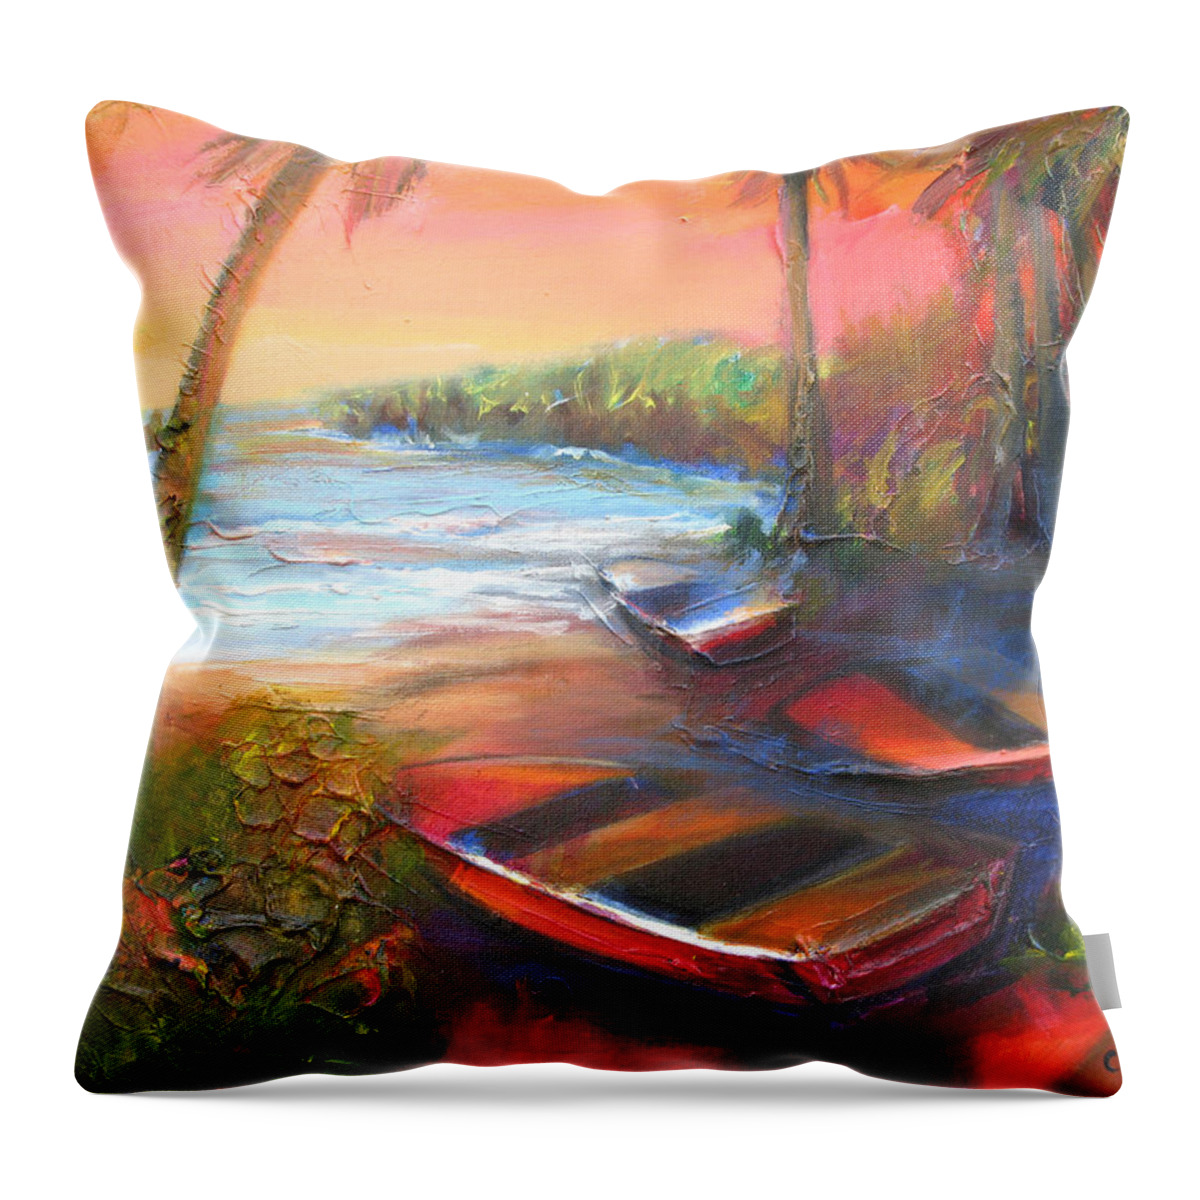 Beach Throw Pillow featuring the painting Boats by the Sea by Cynthia McLean